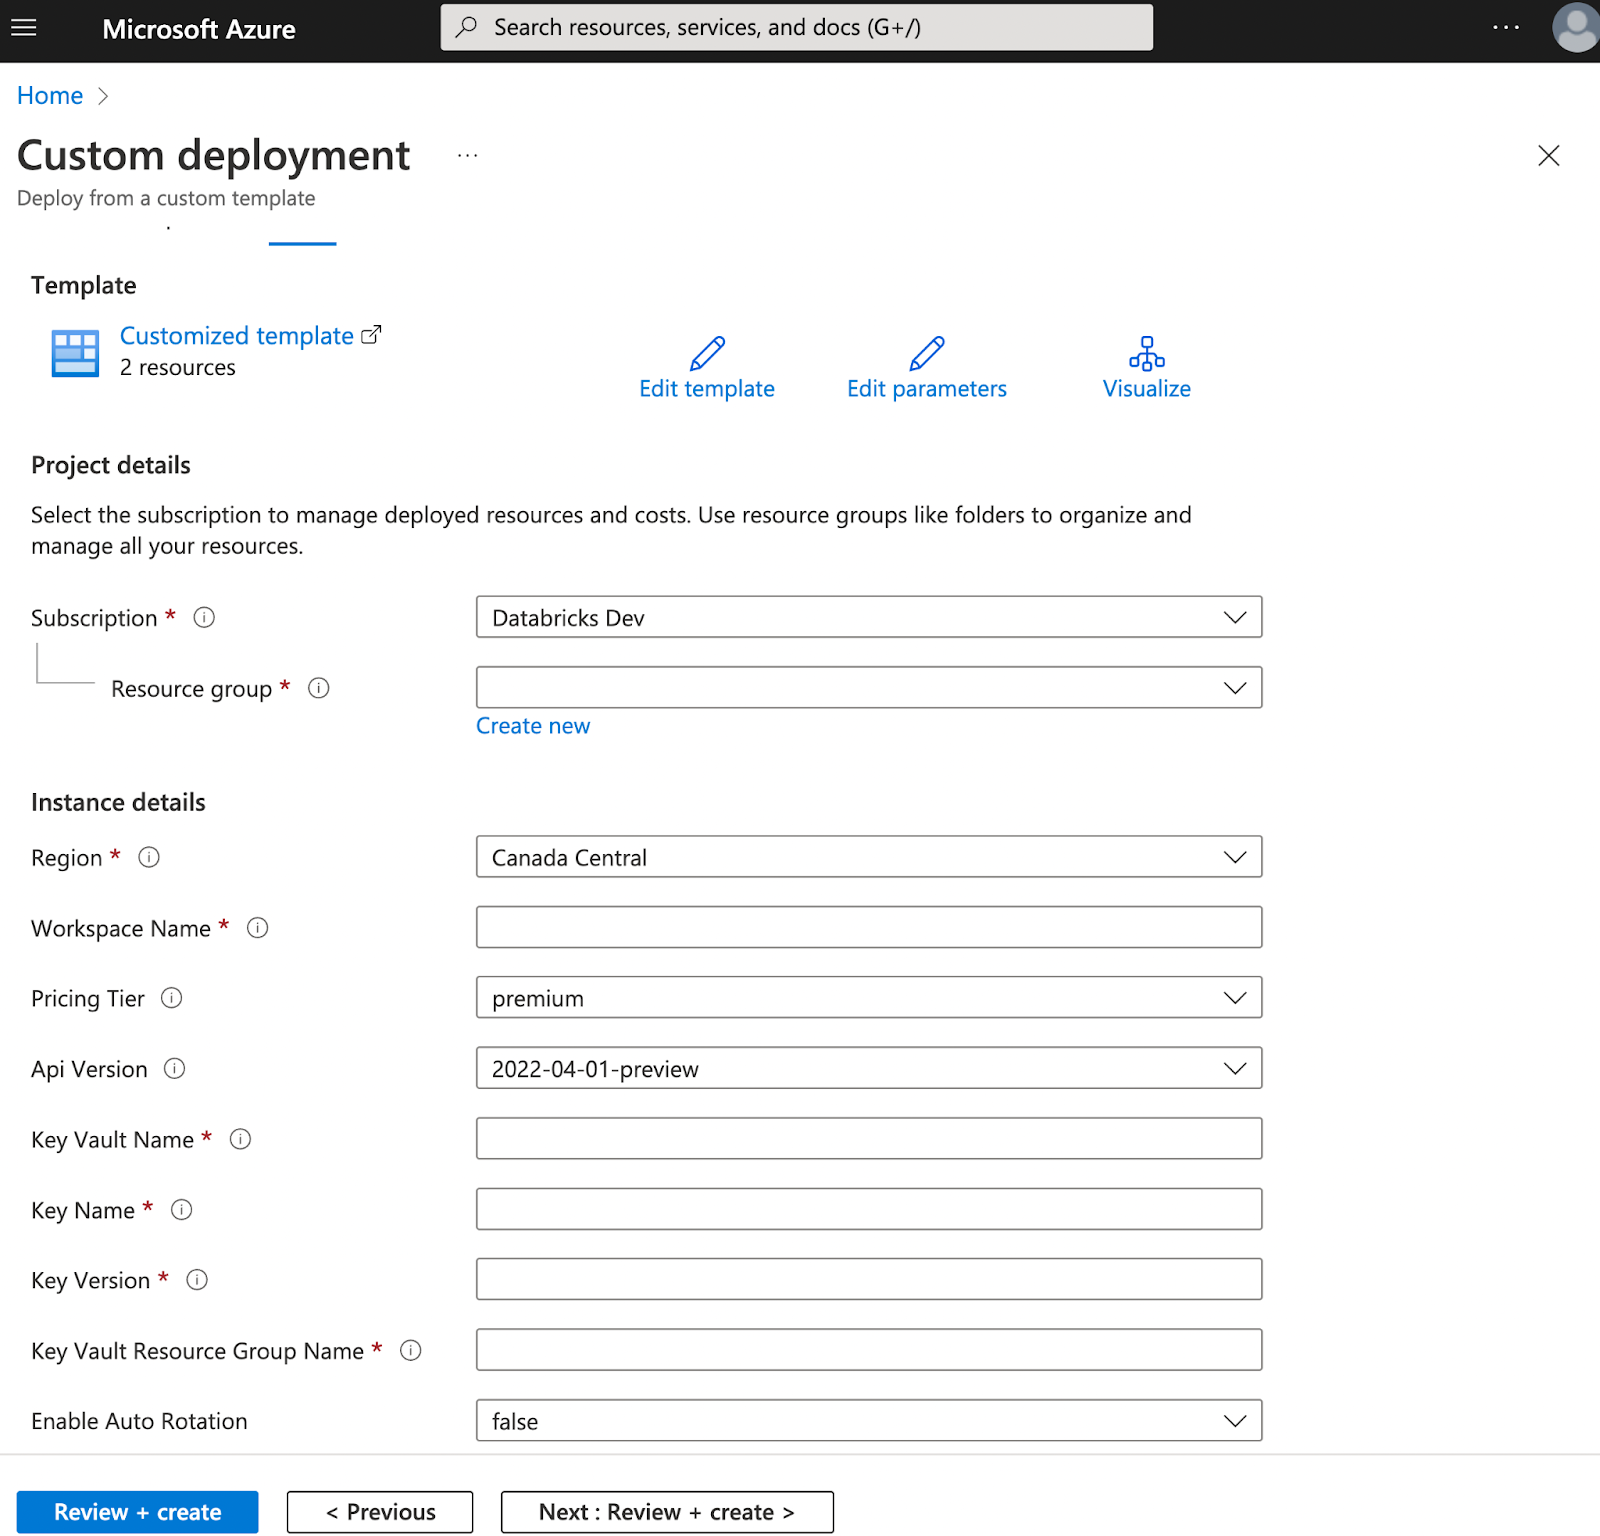 Project details page of the Azure custom deployment portal